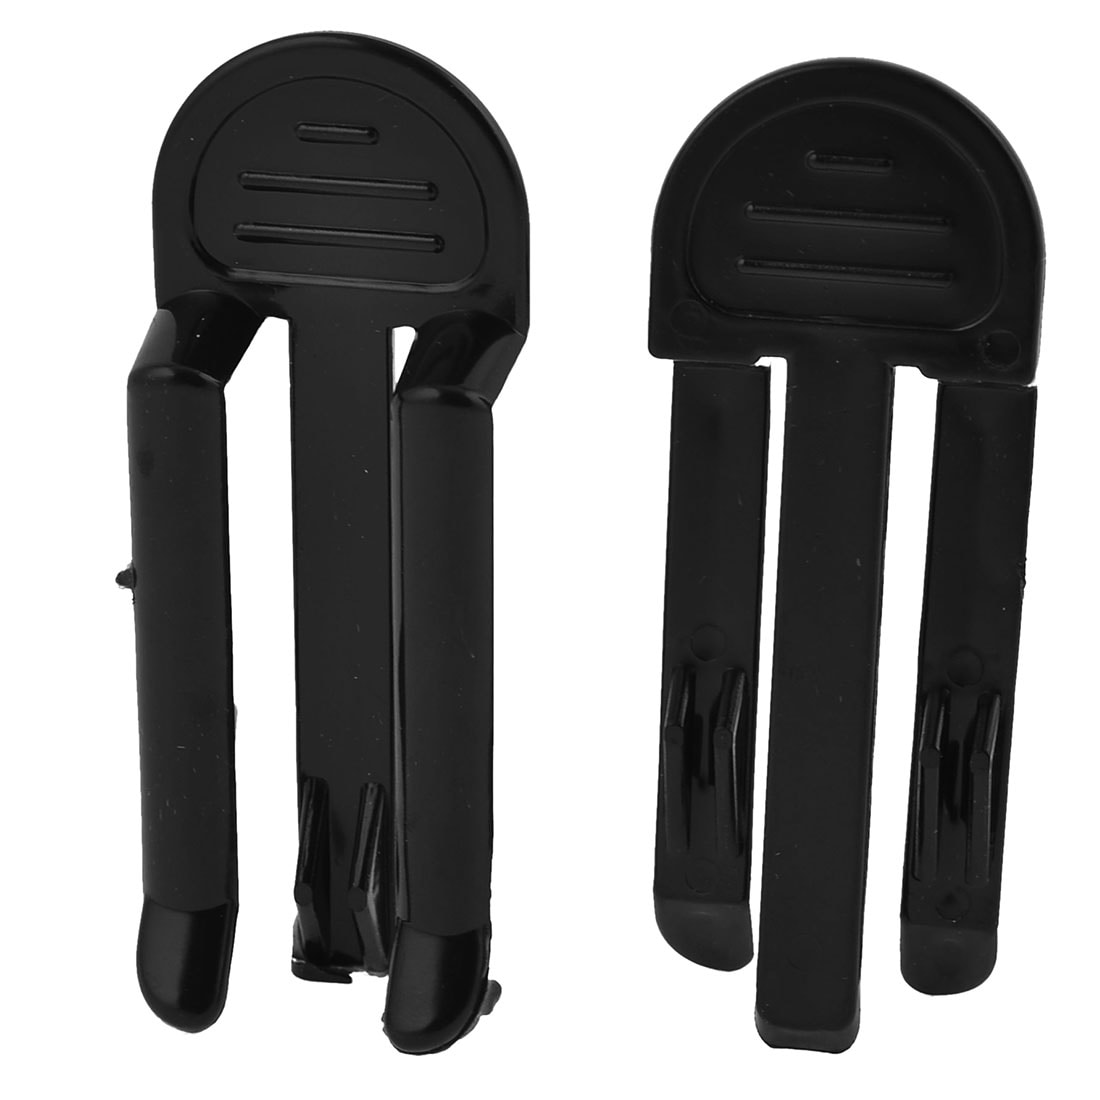 2 pcs Home Office Plastic Ashcan Garbage Basket Bags Holder Clip Clamp -  Black - 3.3 x 1.3(L*W)